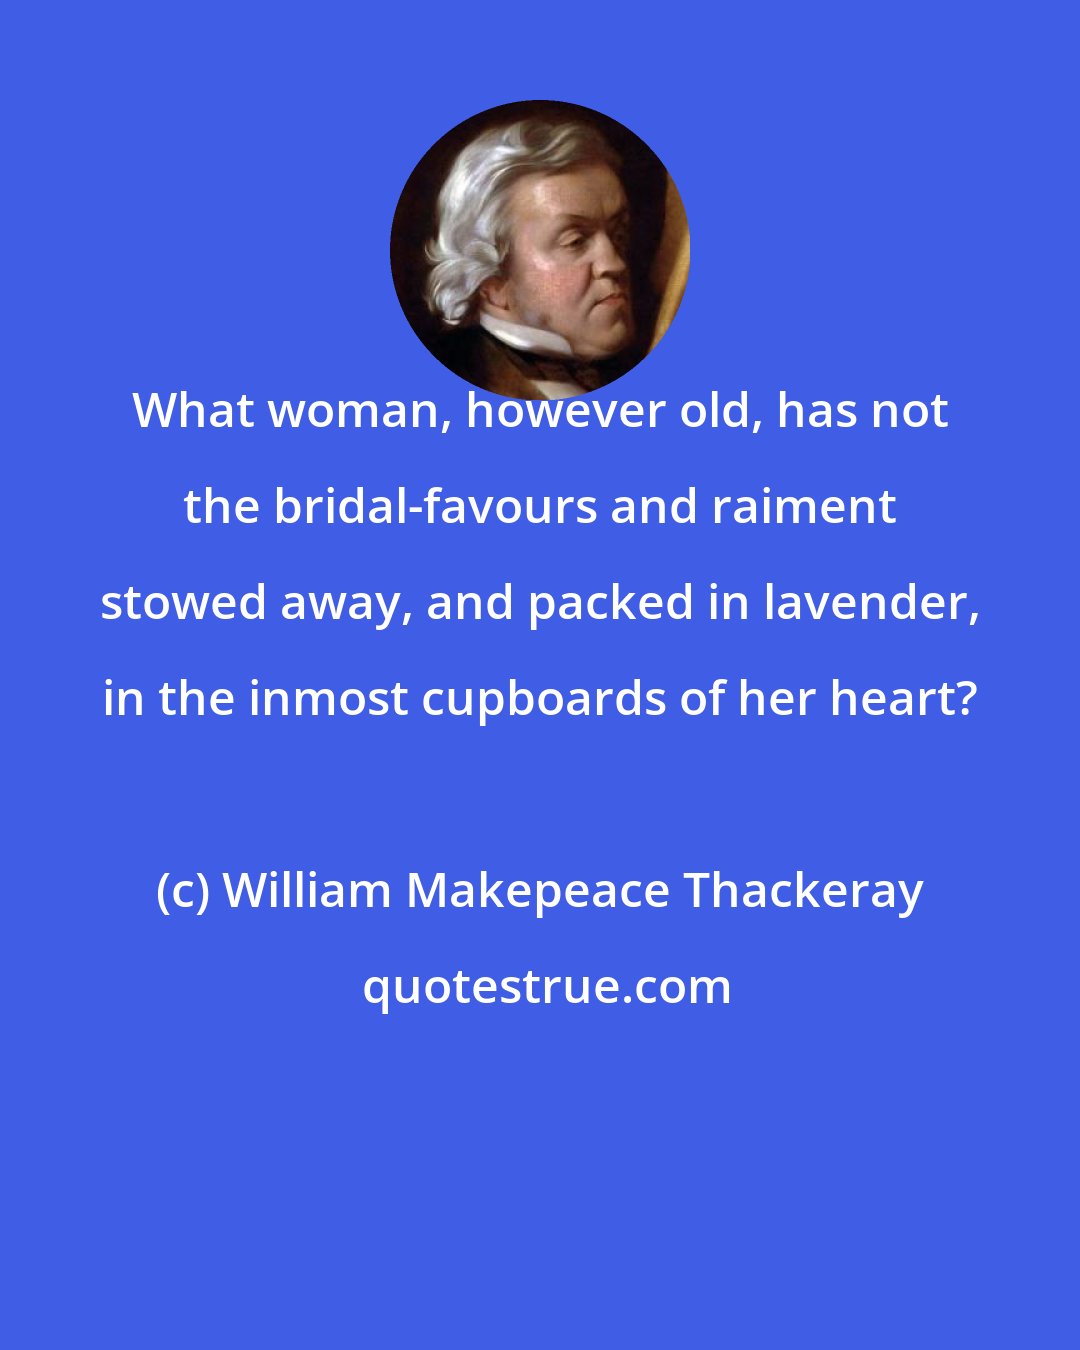 William Makepeace Thackeray: What woman, however old, has not the bridal-favours and raiment stowed away, and packed in lavender, in the inmost cupboards of her heart?